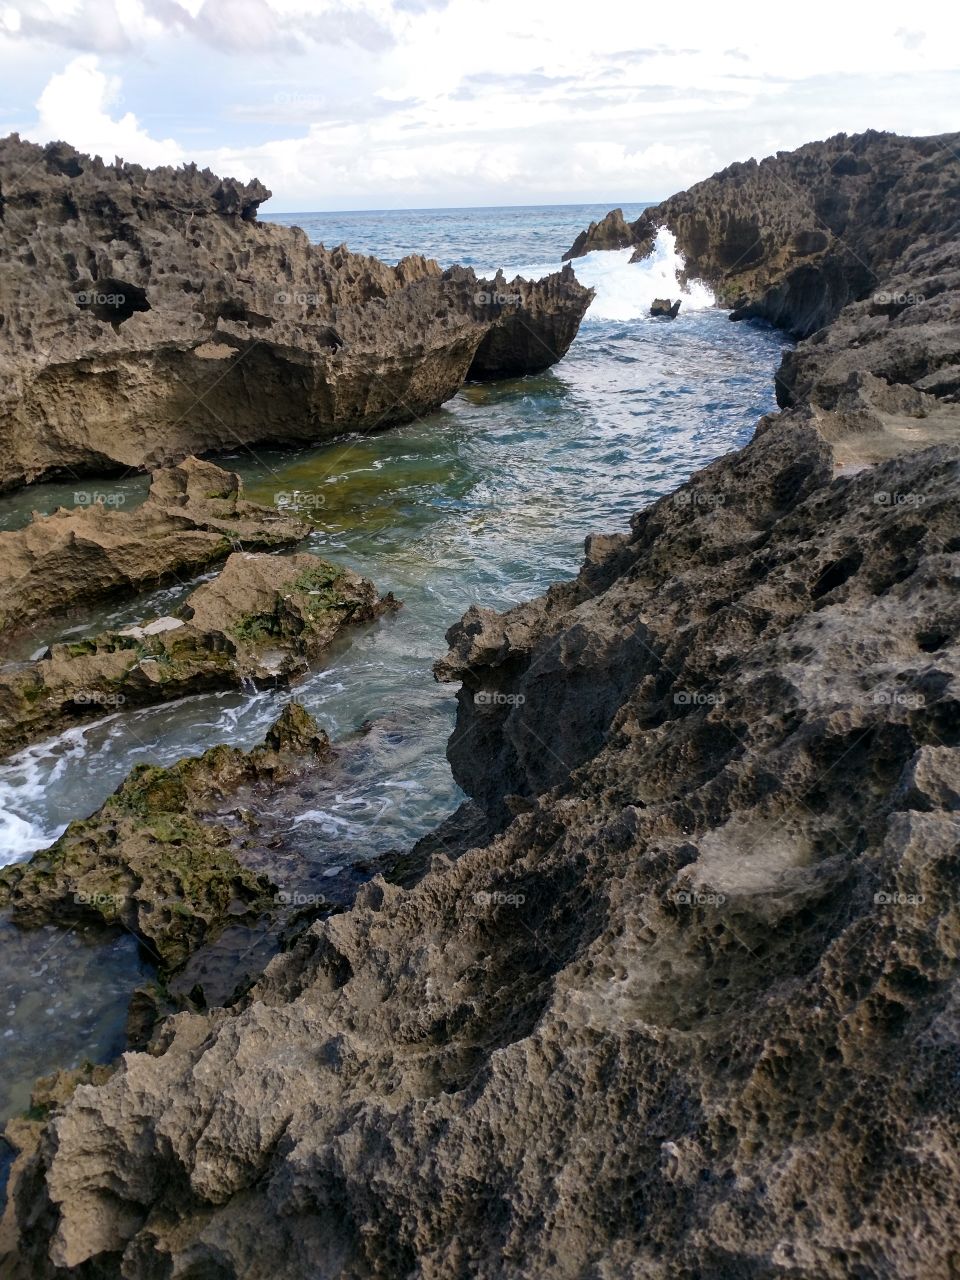 Natural water channel with waves rolling in at Manati Beach, PR.